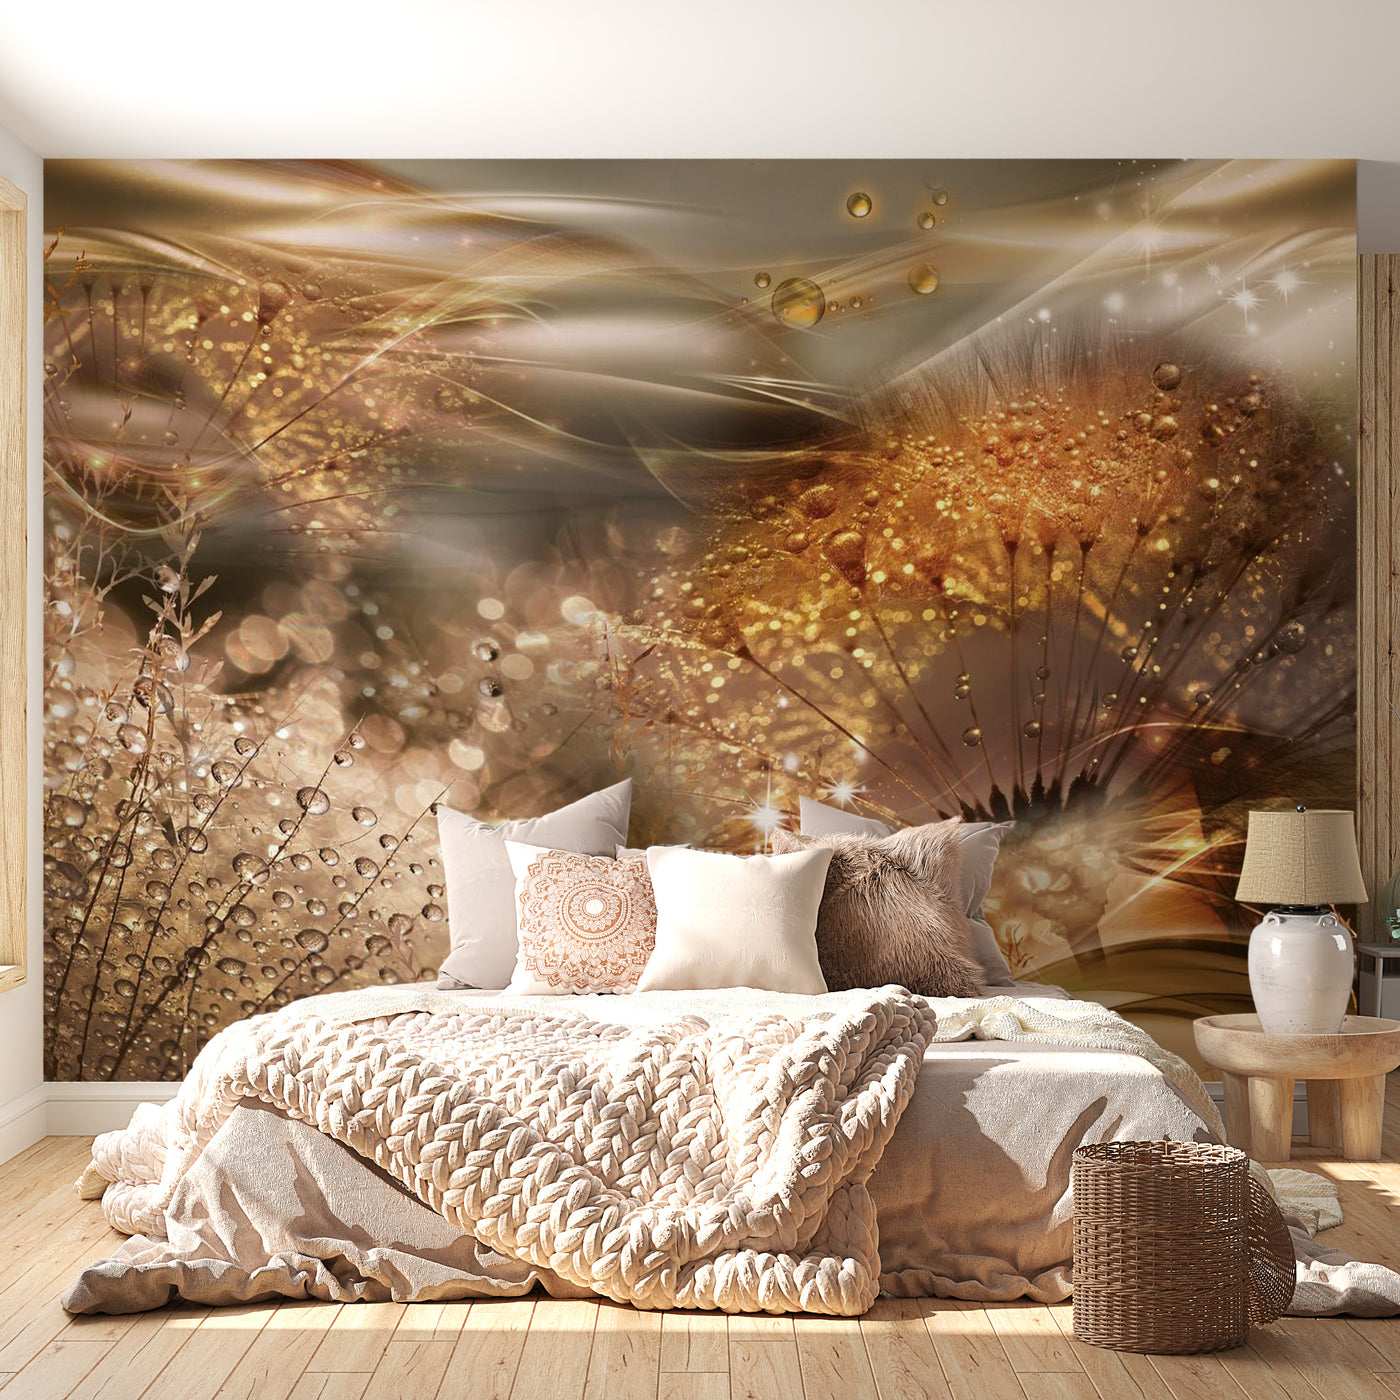 Peel & Stick Floral Wall Mural - Gold Dandelions - Removable Wall Decals